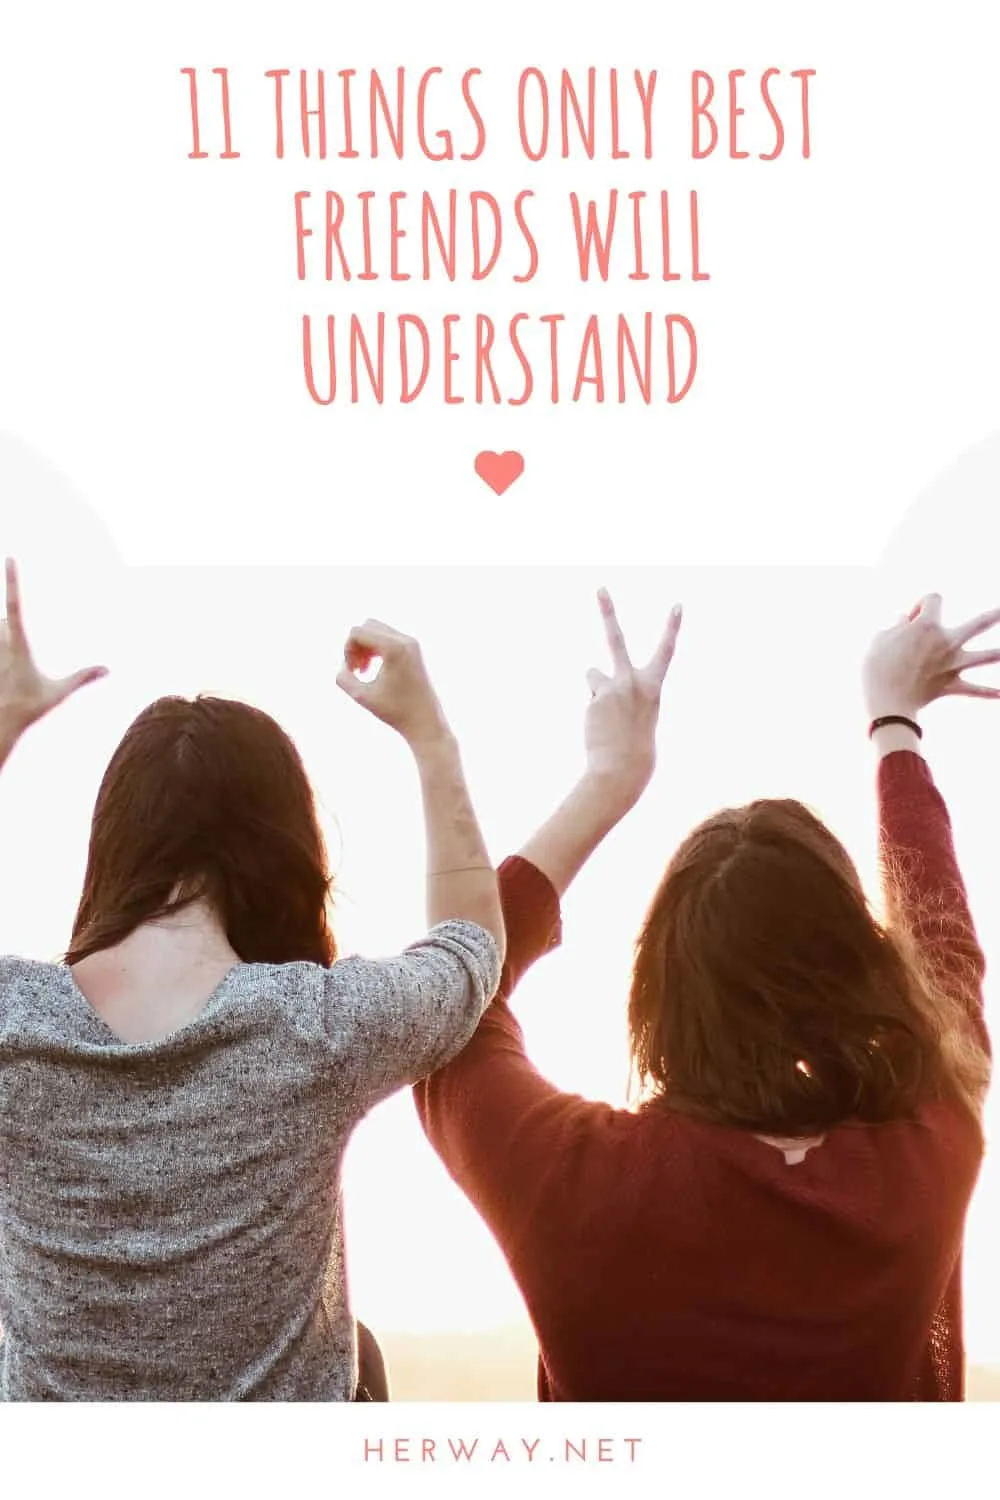 11 THINGS ONLY BEST FRIENDS WILL UNDERSTAND